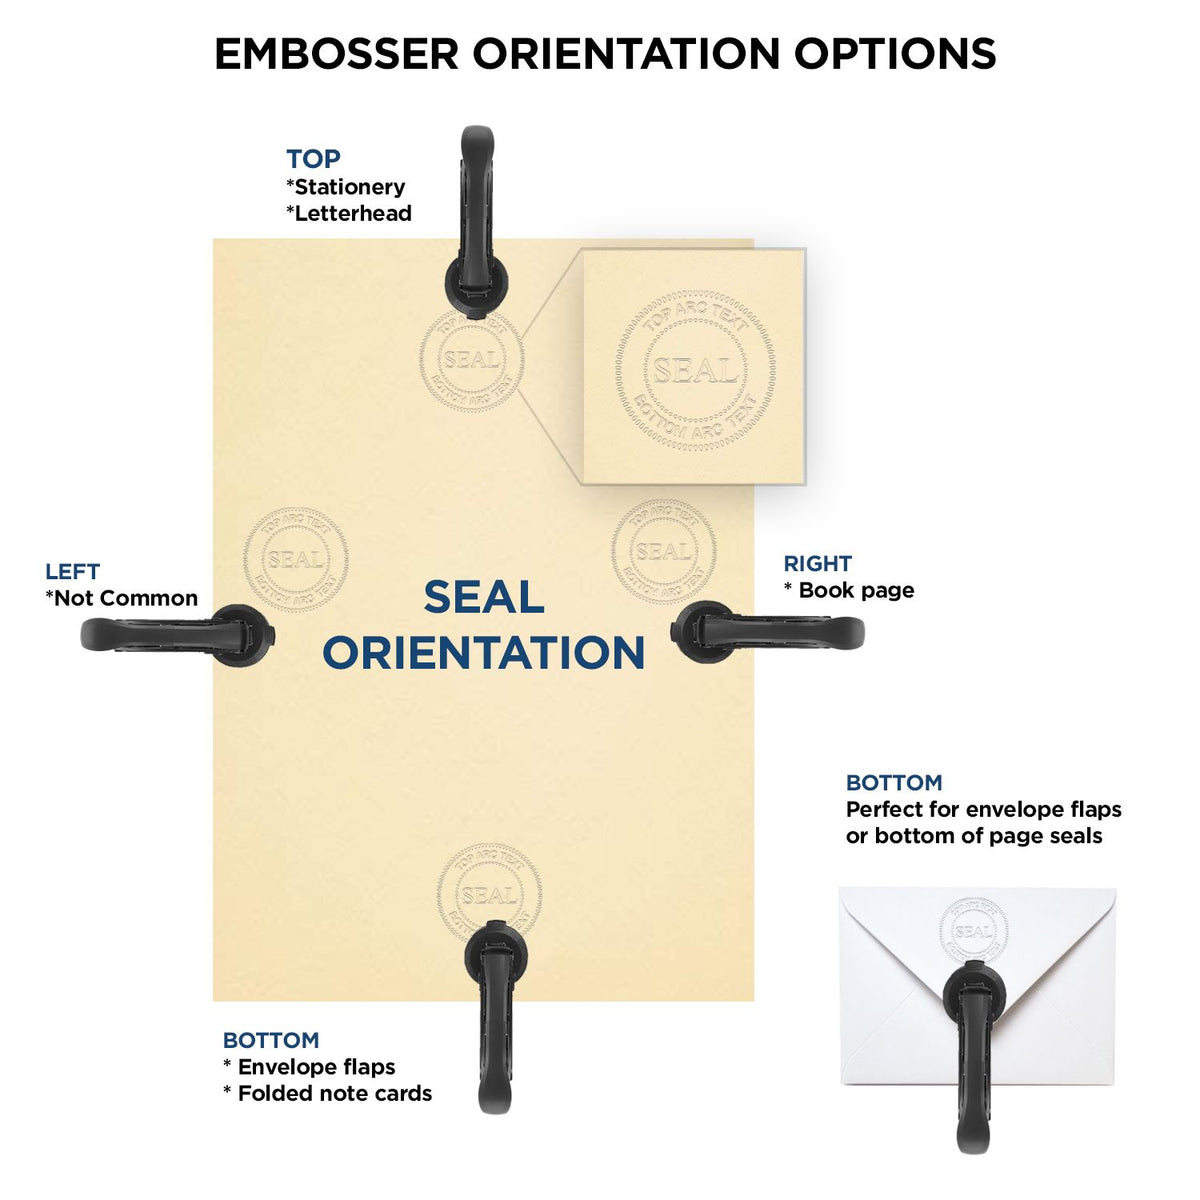 An infographic for the Soft South Carolina Professional Engineer Seal showing embosser orientation, this is showing examples of a top, bottom, right and left insert.